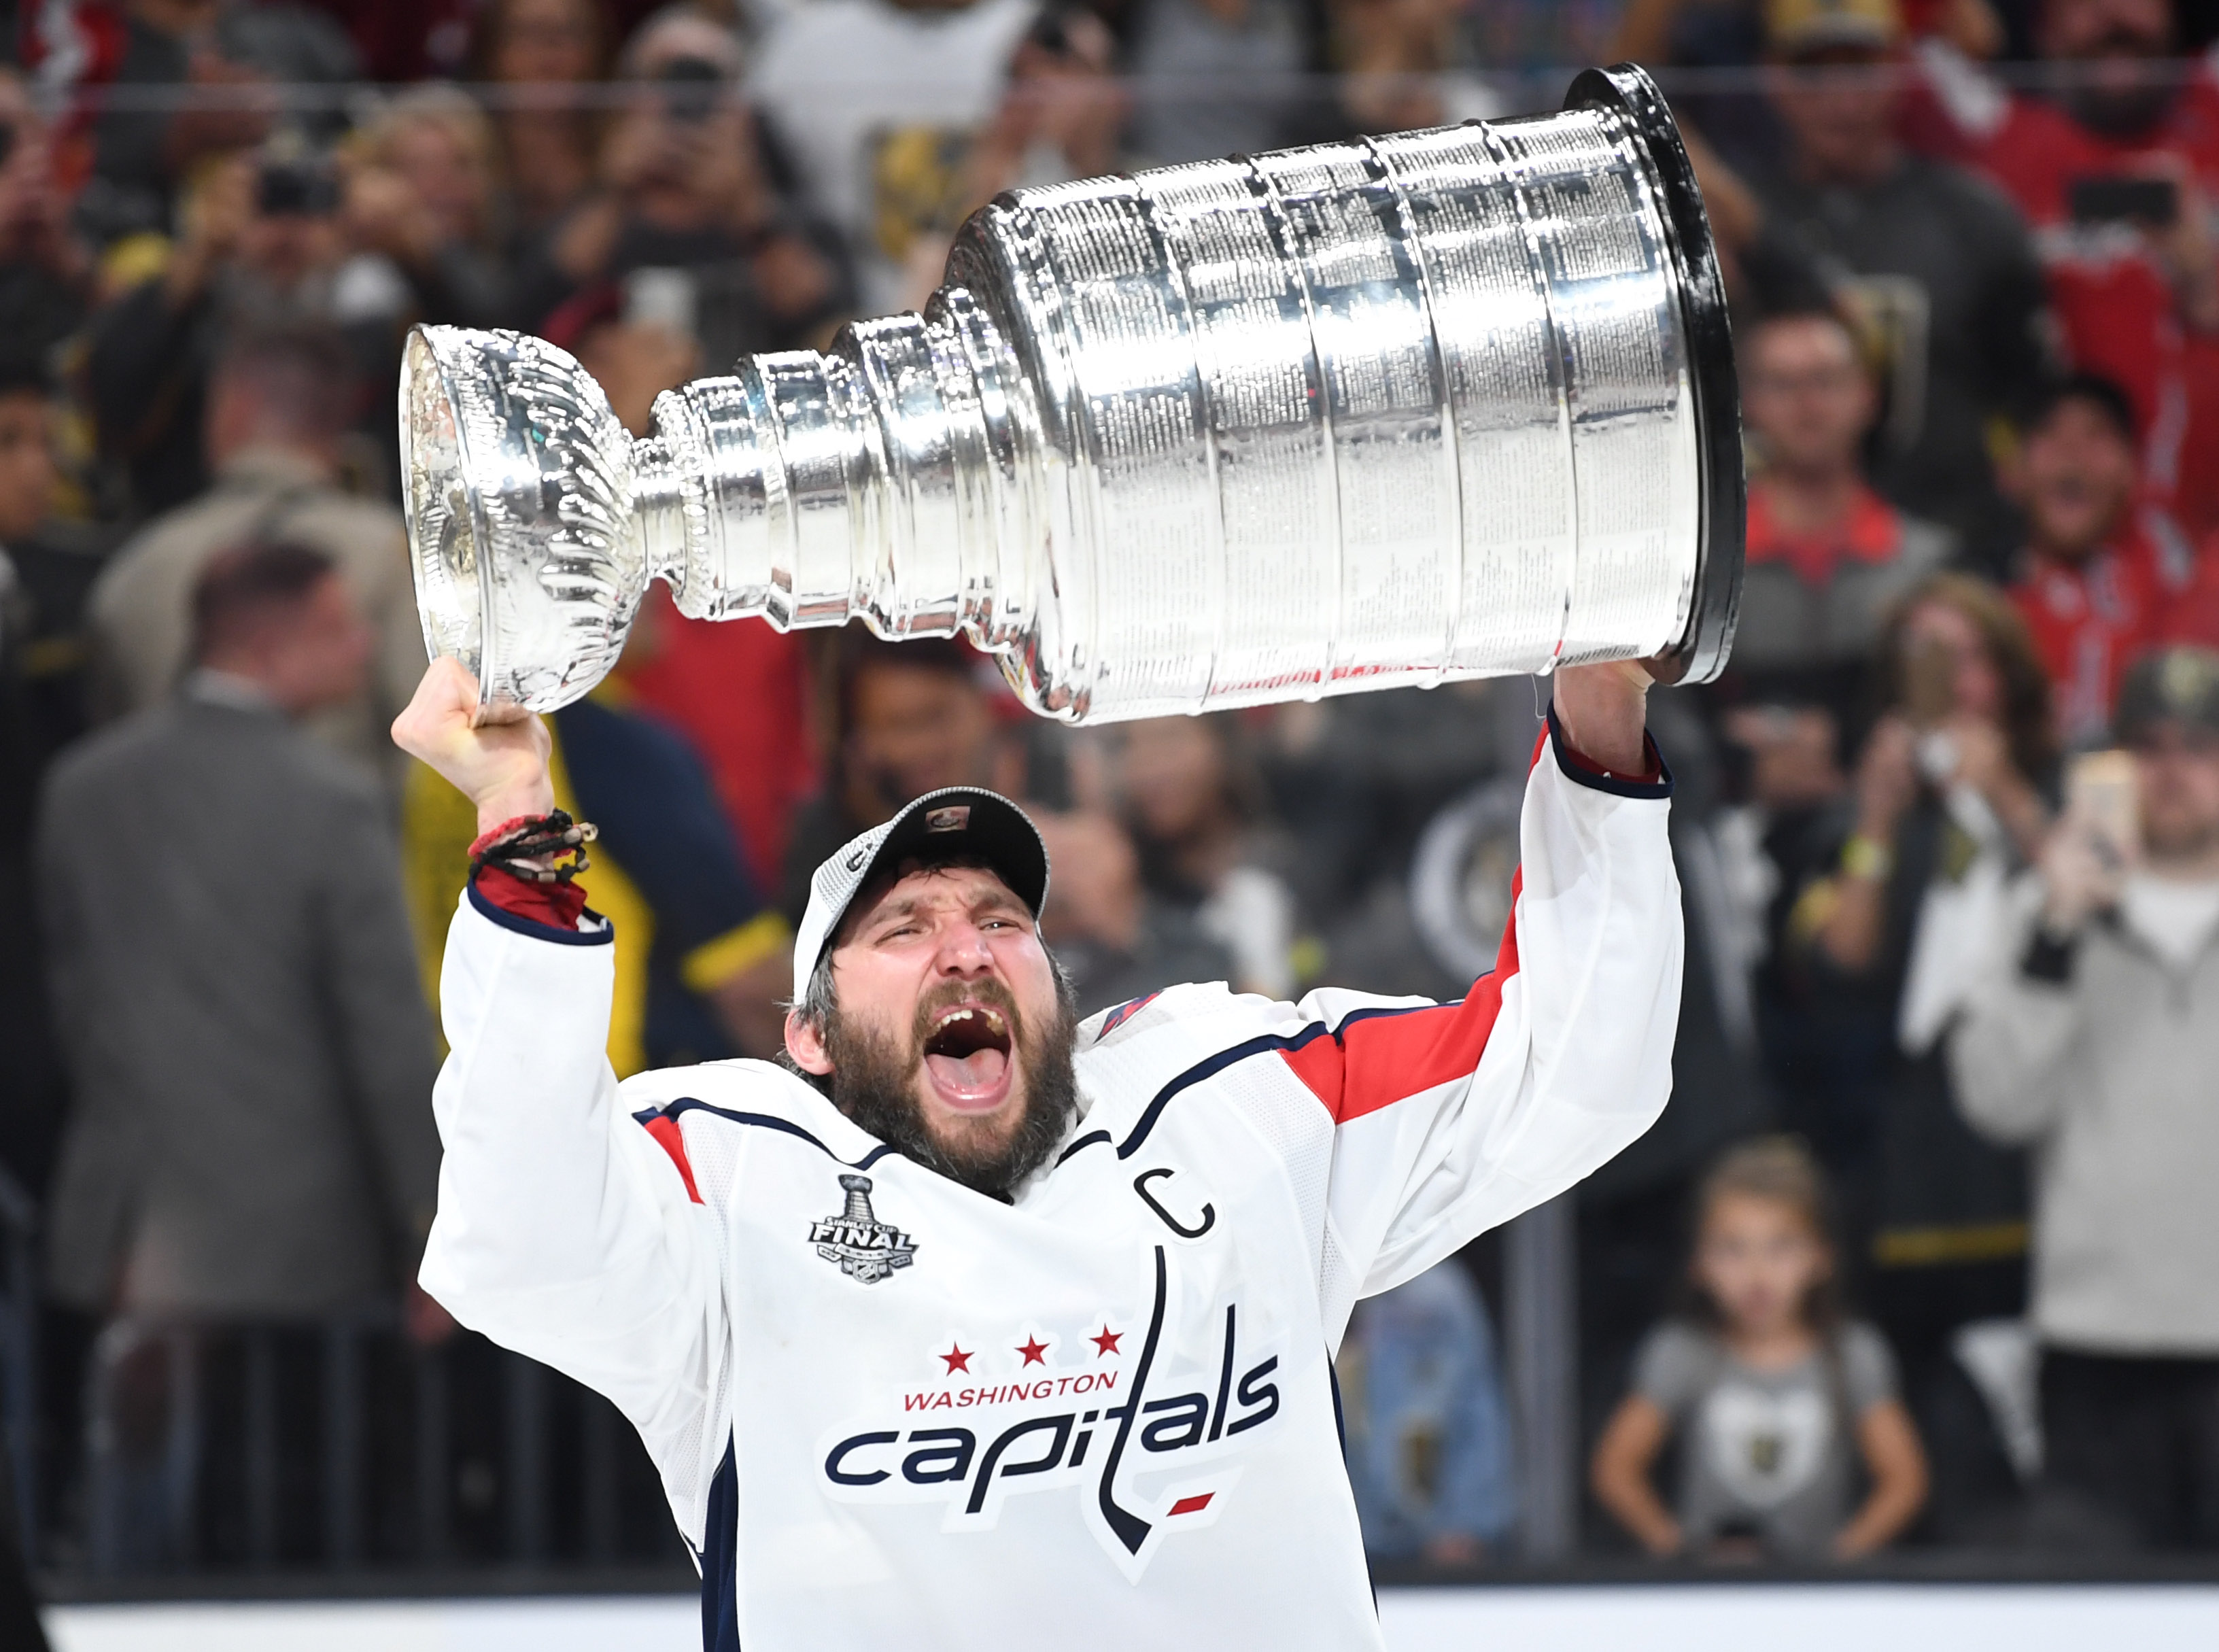 Celebrate the first Stanley Cup Championship for the Washington